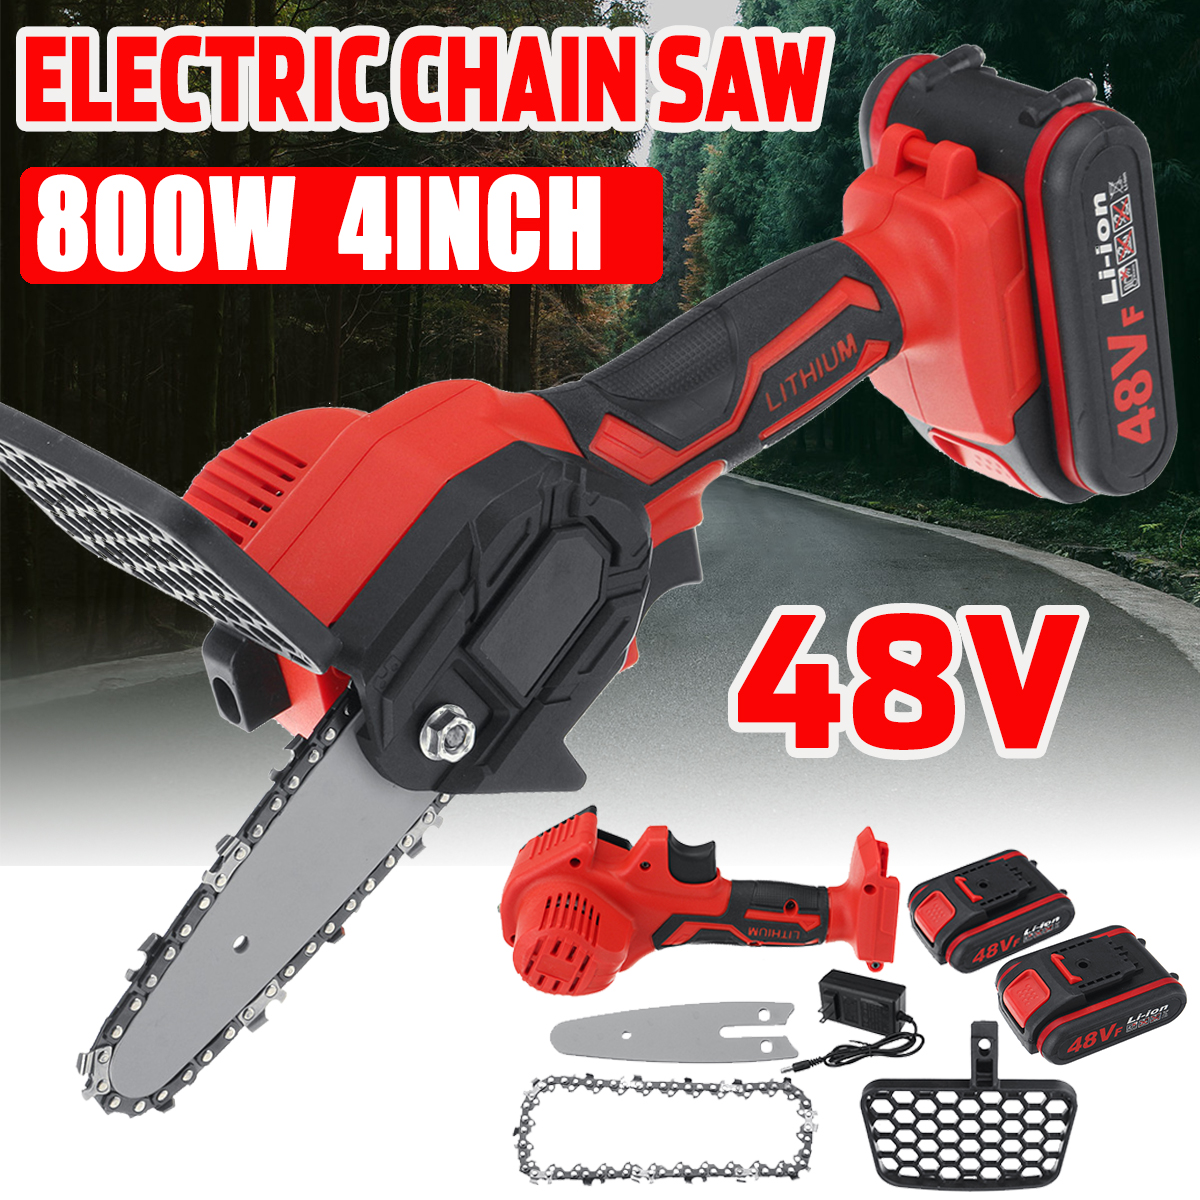 21V-Rechargeable-Electric-Chain-Saw-Portable-Woodworking-Saw-Cordless-Wood-Cutter-W-1pc2pcs-Battery-1786523-1